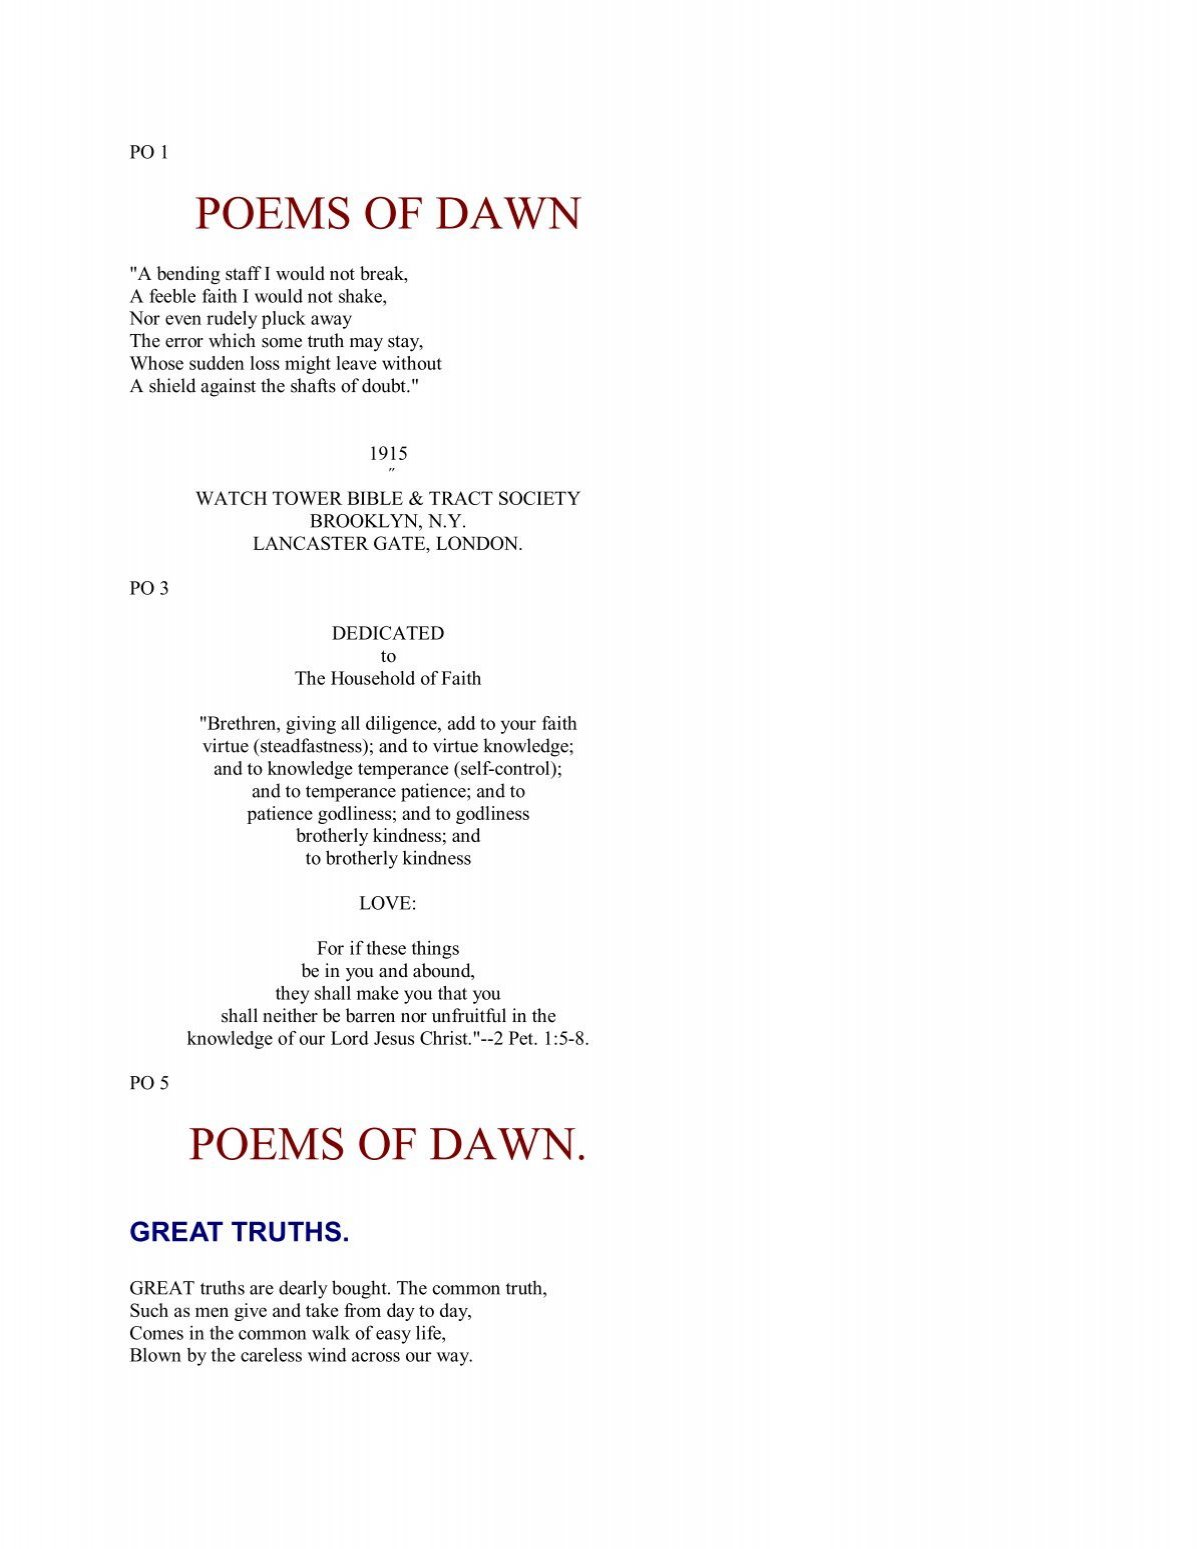 Poems of Dawn - World One Assist